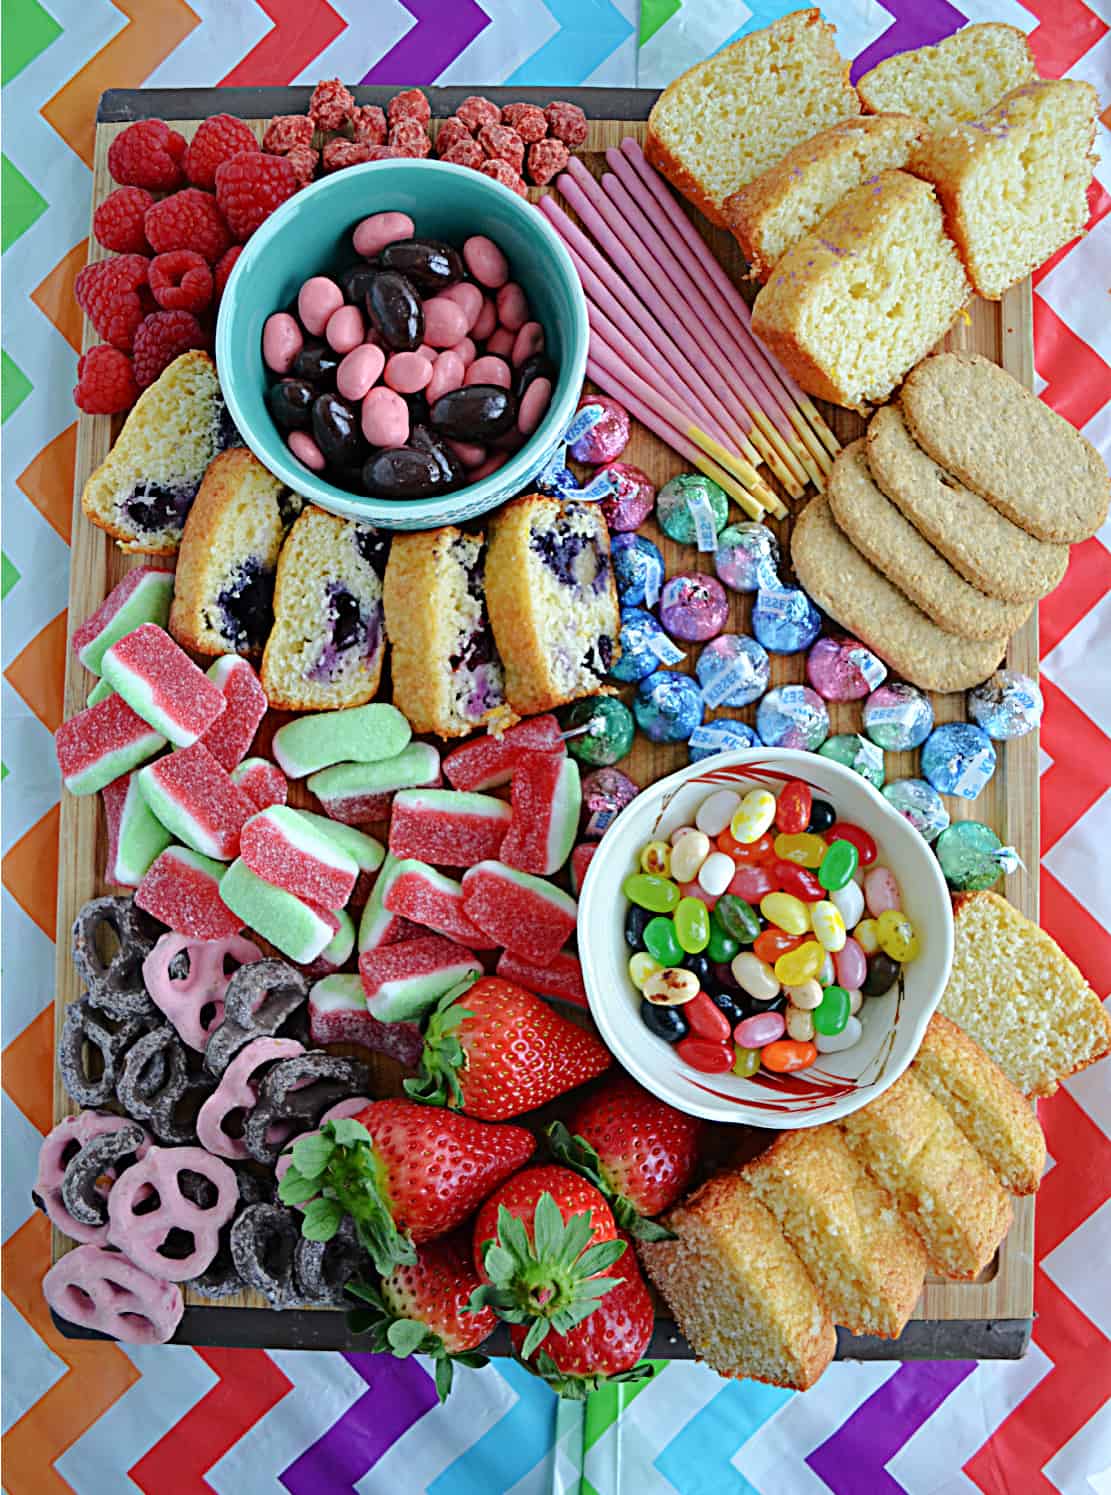 Easter Dessert board with fruits, chocolates, candies, and pound cake.